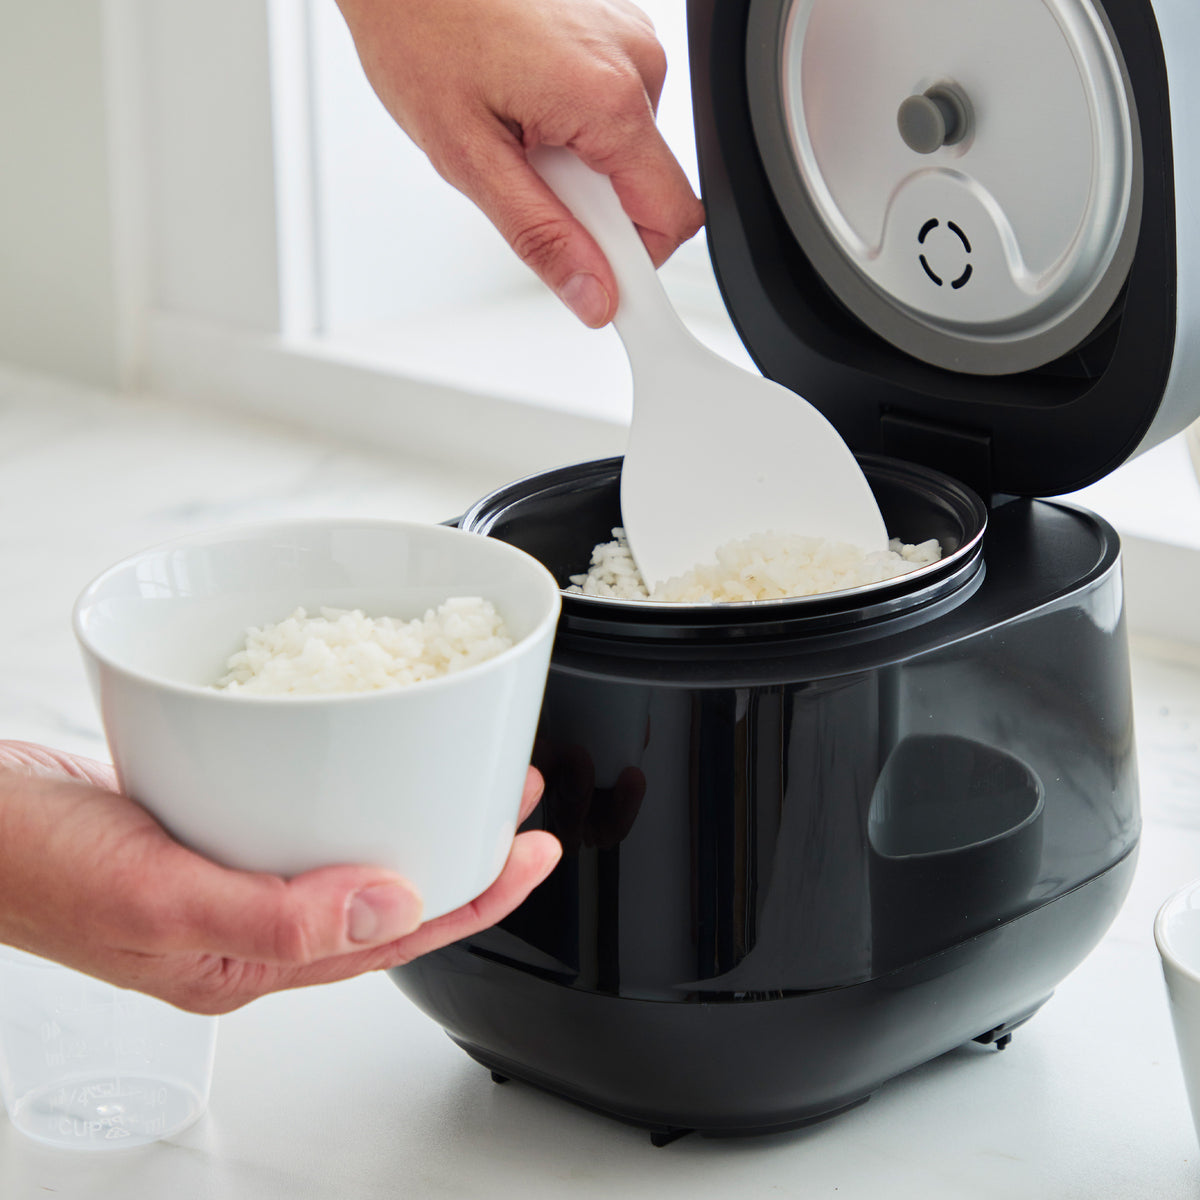 The Ultimate GreenLife Rice Cooker Review - Trusted Cookware